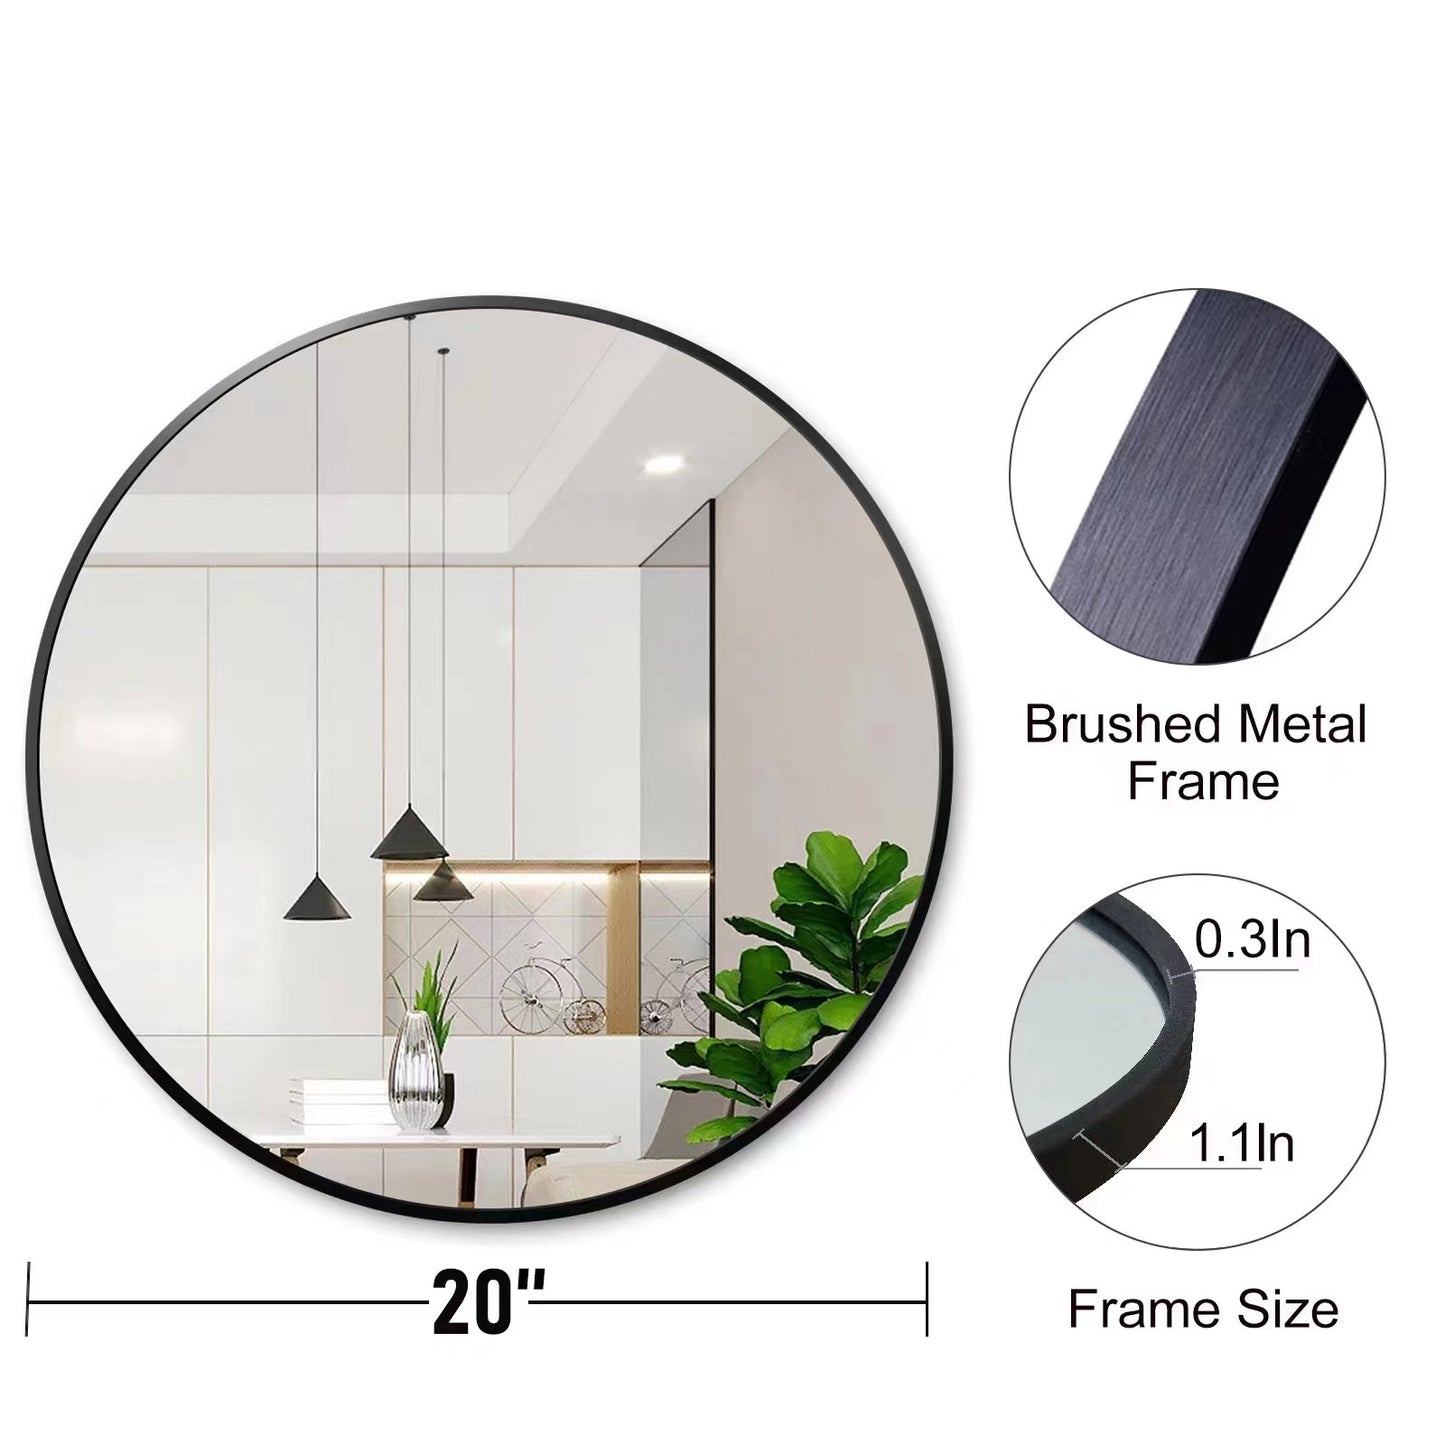 Circle Mirror 20 Inch, Black Round Wall Mirror Suitable for Bedroom, Vanity, Living Room, Bathroom, Entryway Wall Decor and More, Brushed Aluminum Frame Circle Mirrors for Wall